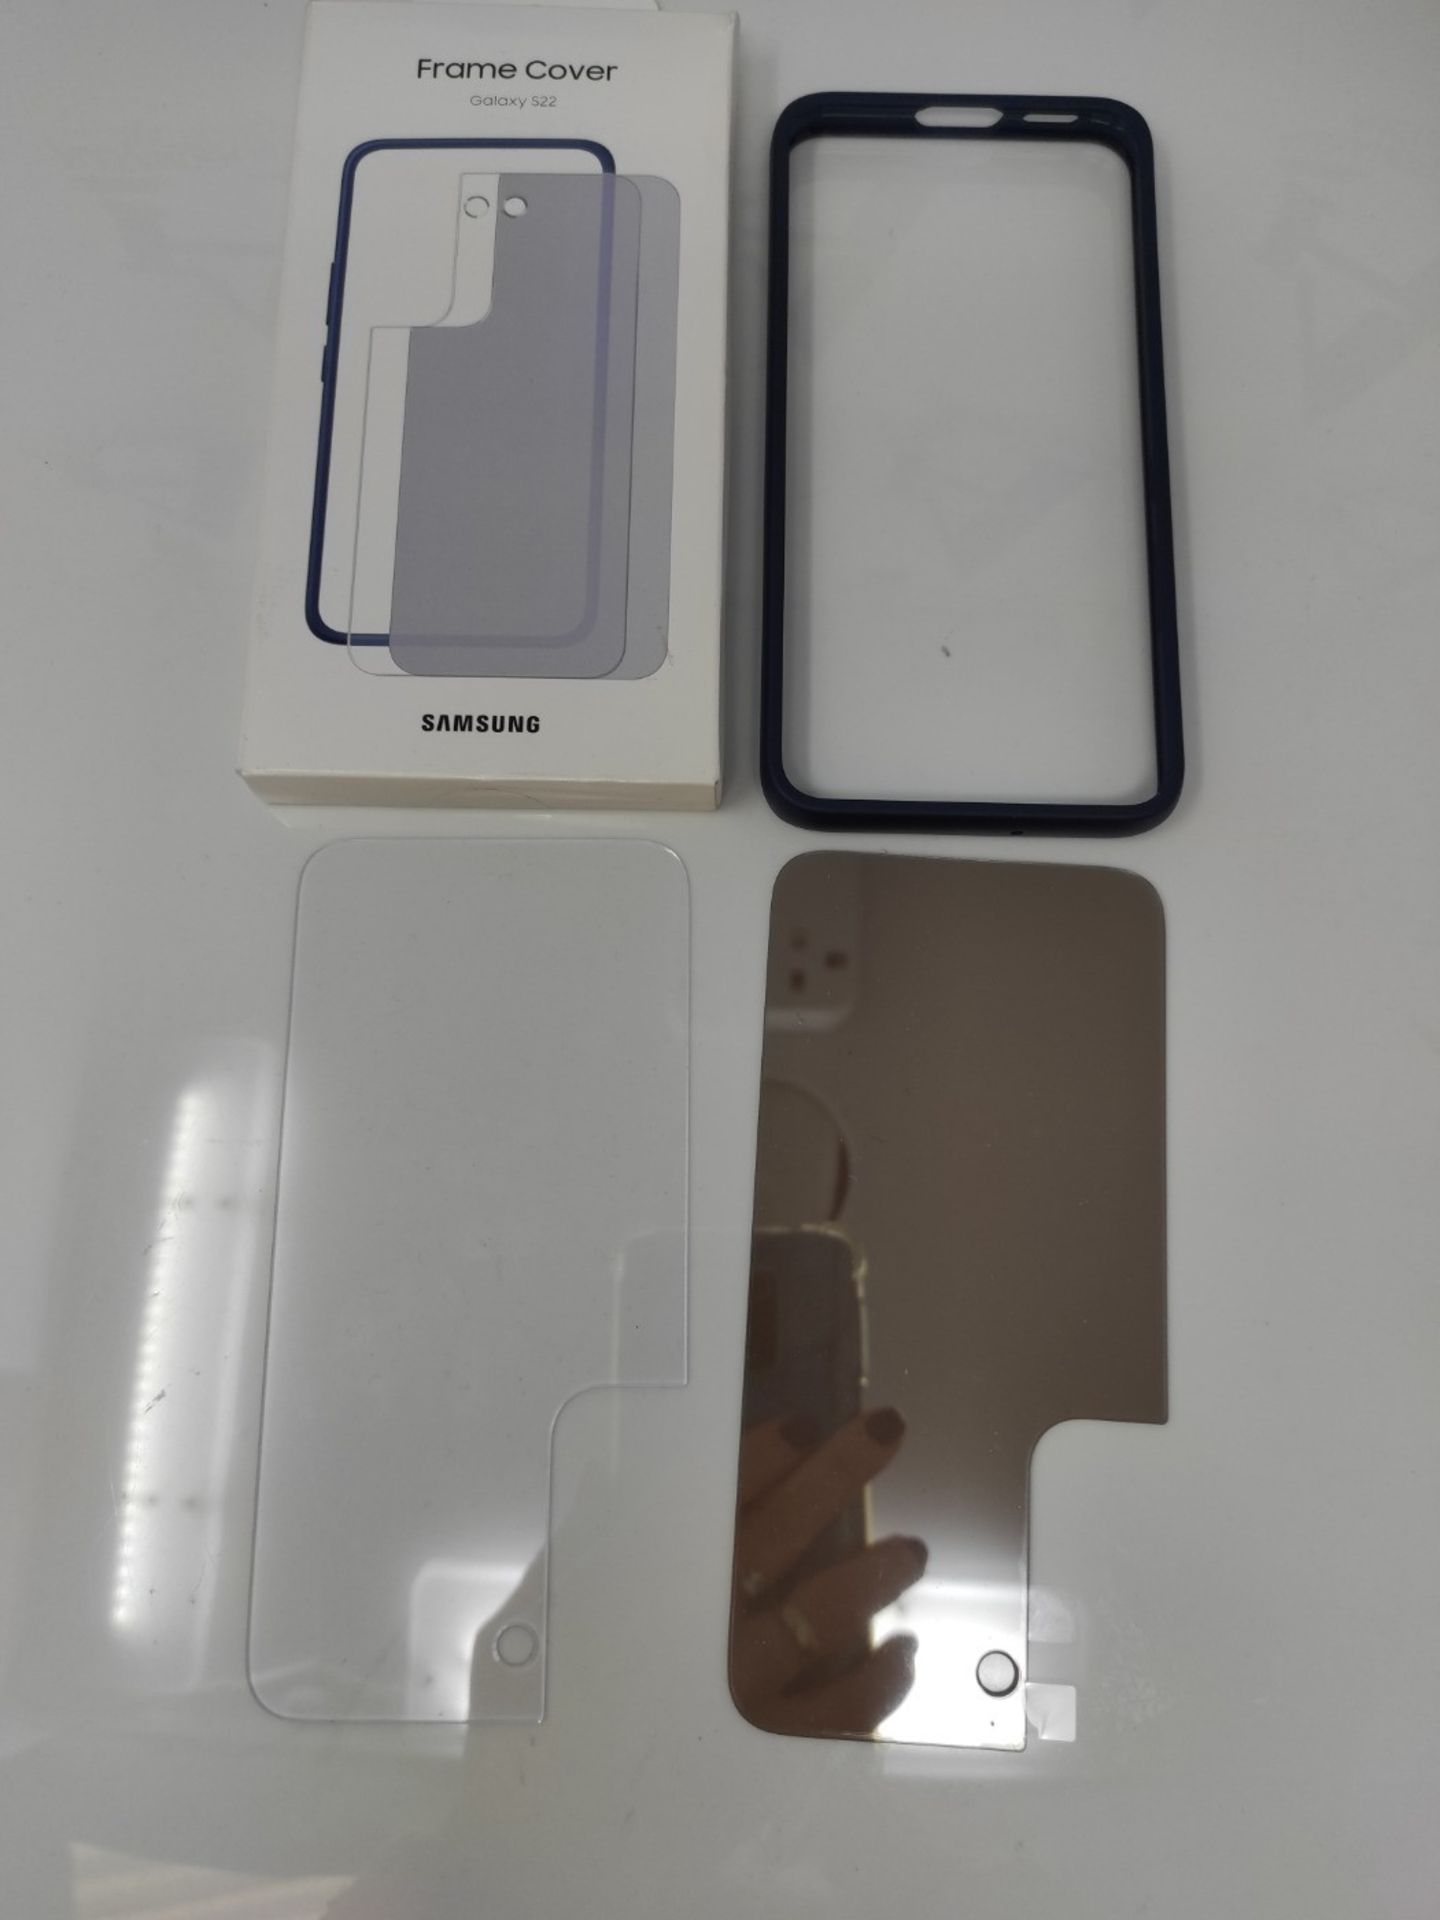 Samsung Official S22 Frame Cover Navy - Image 2 of 2